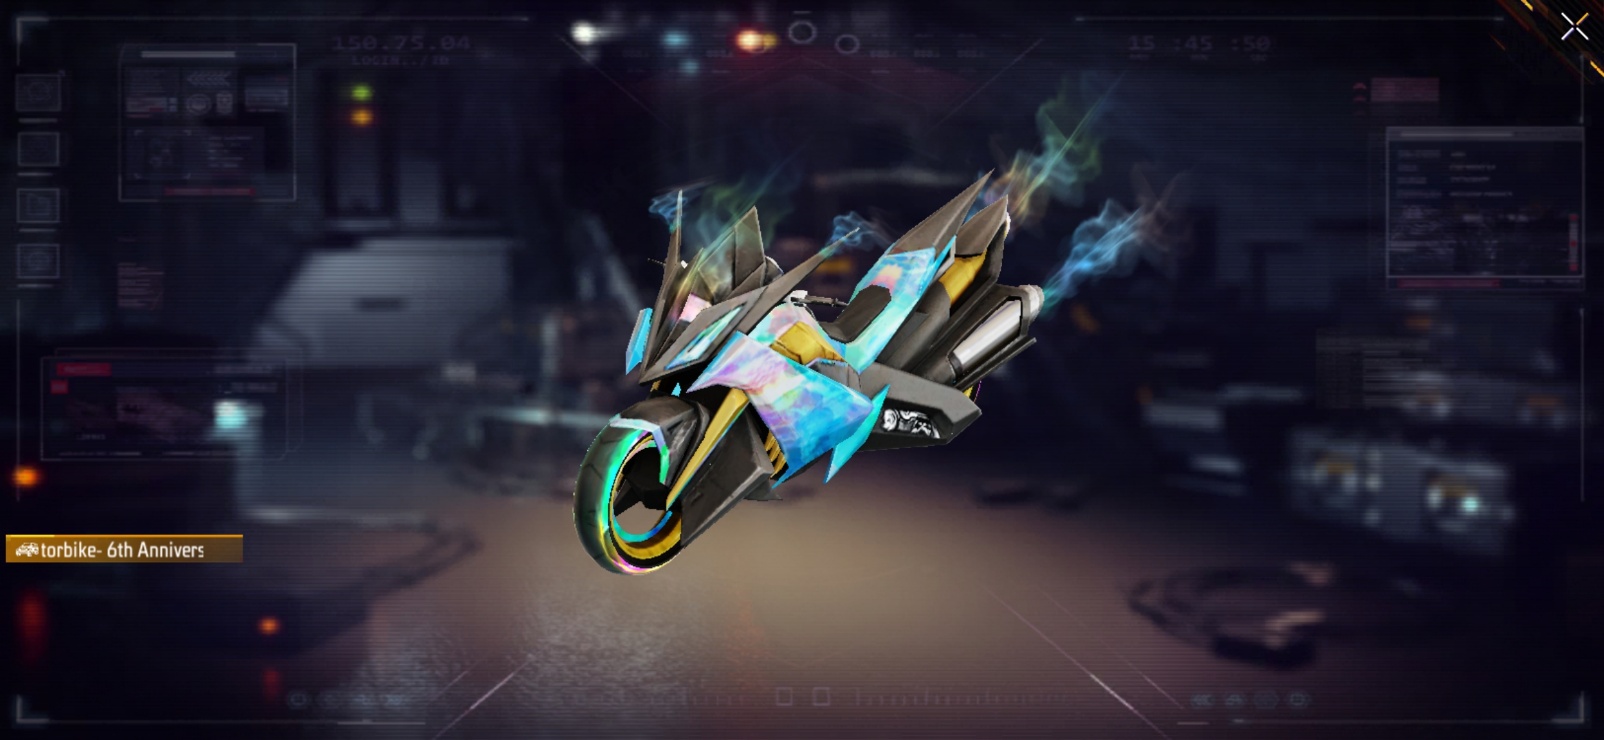 How To Get 6th Anniversary Motorbike Skin For Free In Free Fire